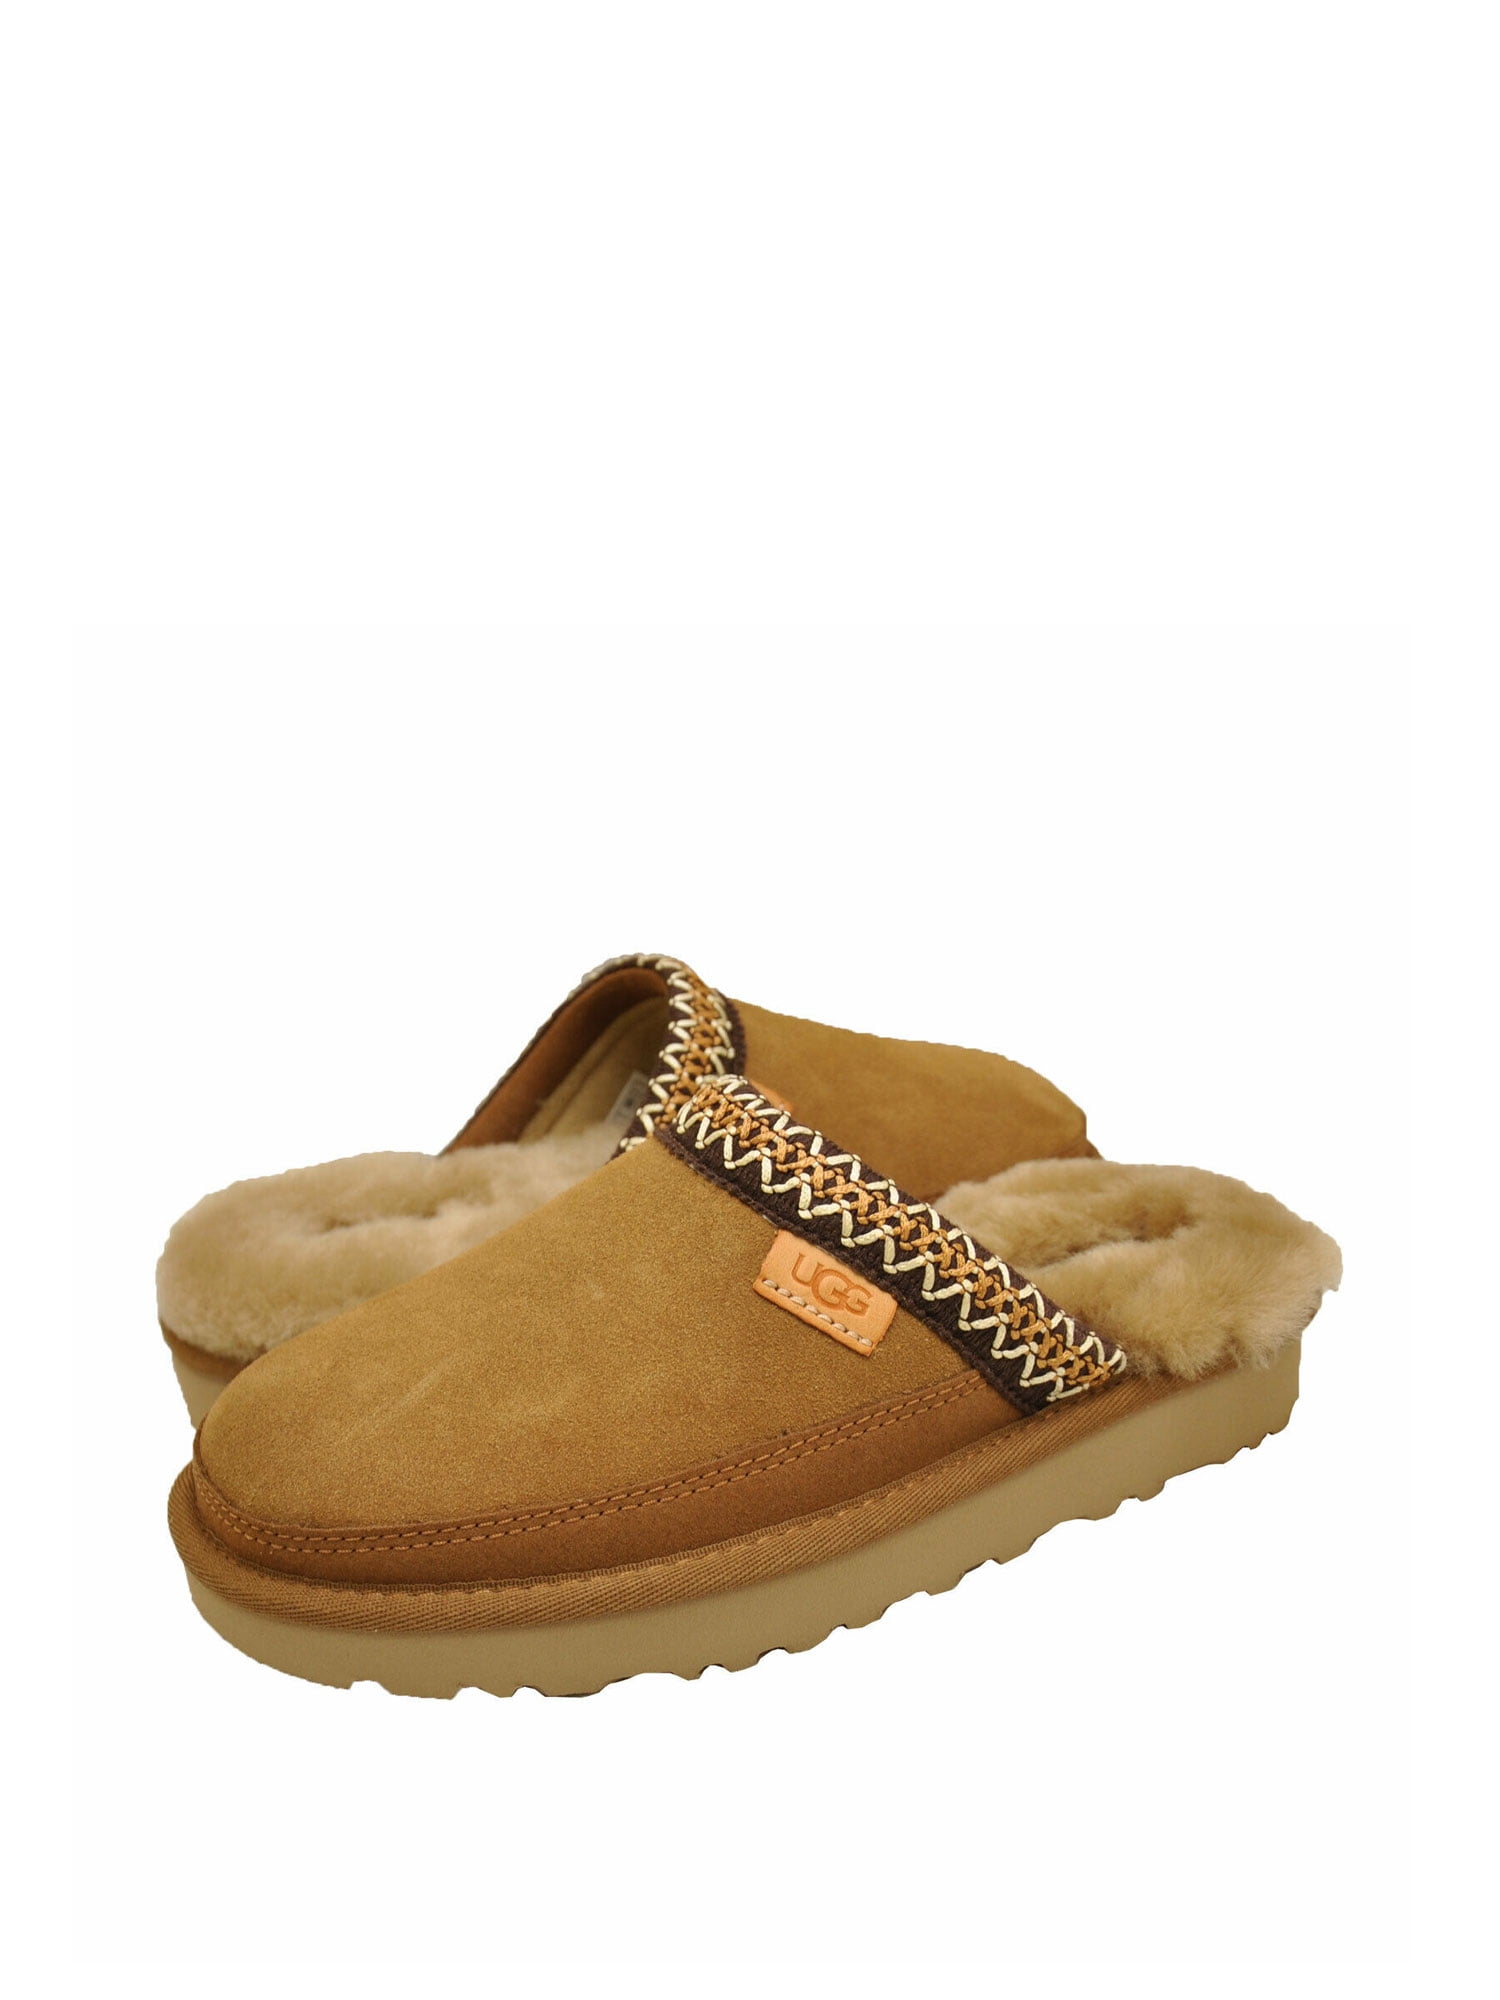 Buy > how to deodorize ugg slippers > in stock